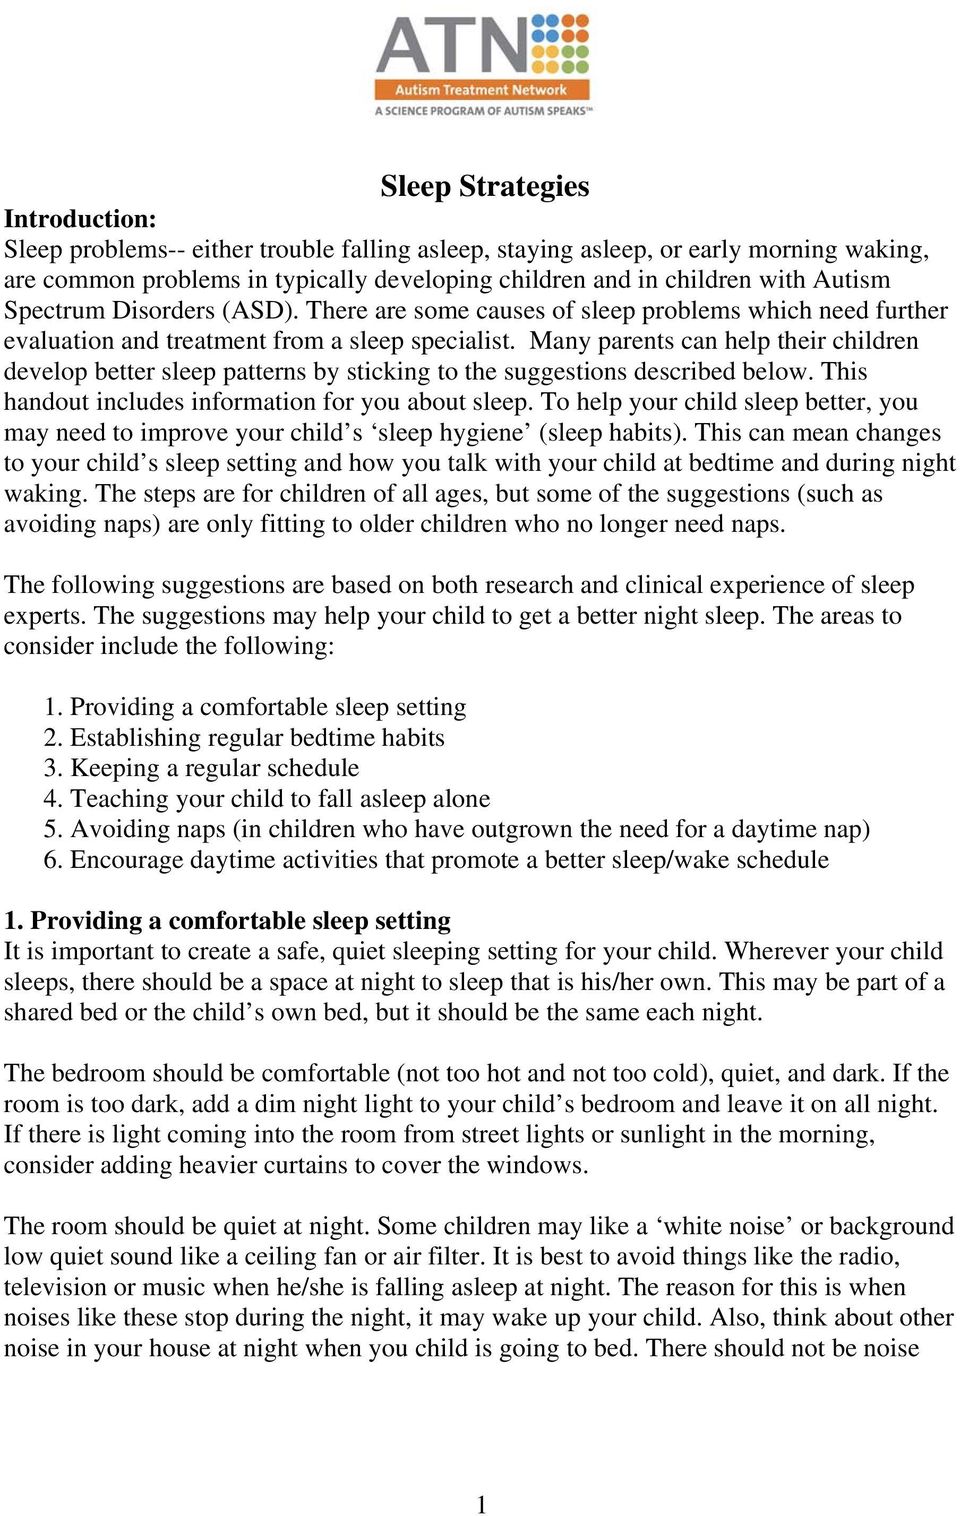 Many parents can help their children develop better sleep patterns by sticking to the suggestions described below. This handout includes information for you about sleep.